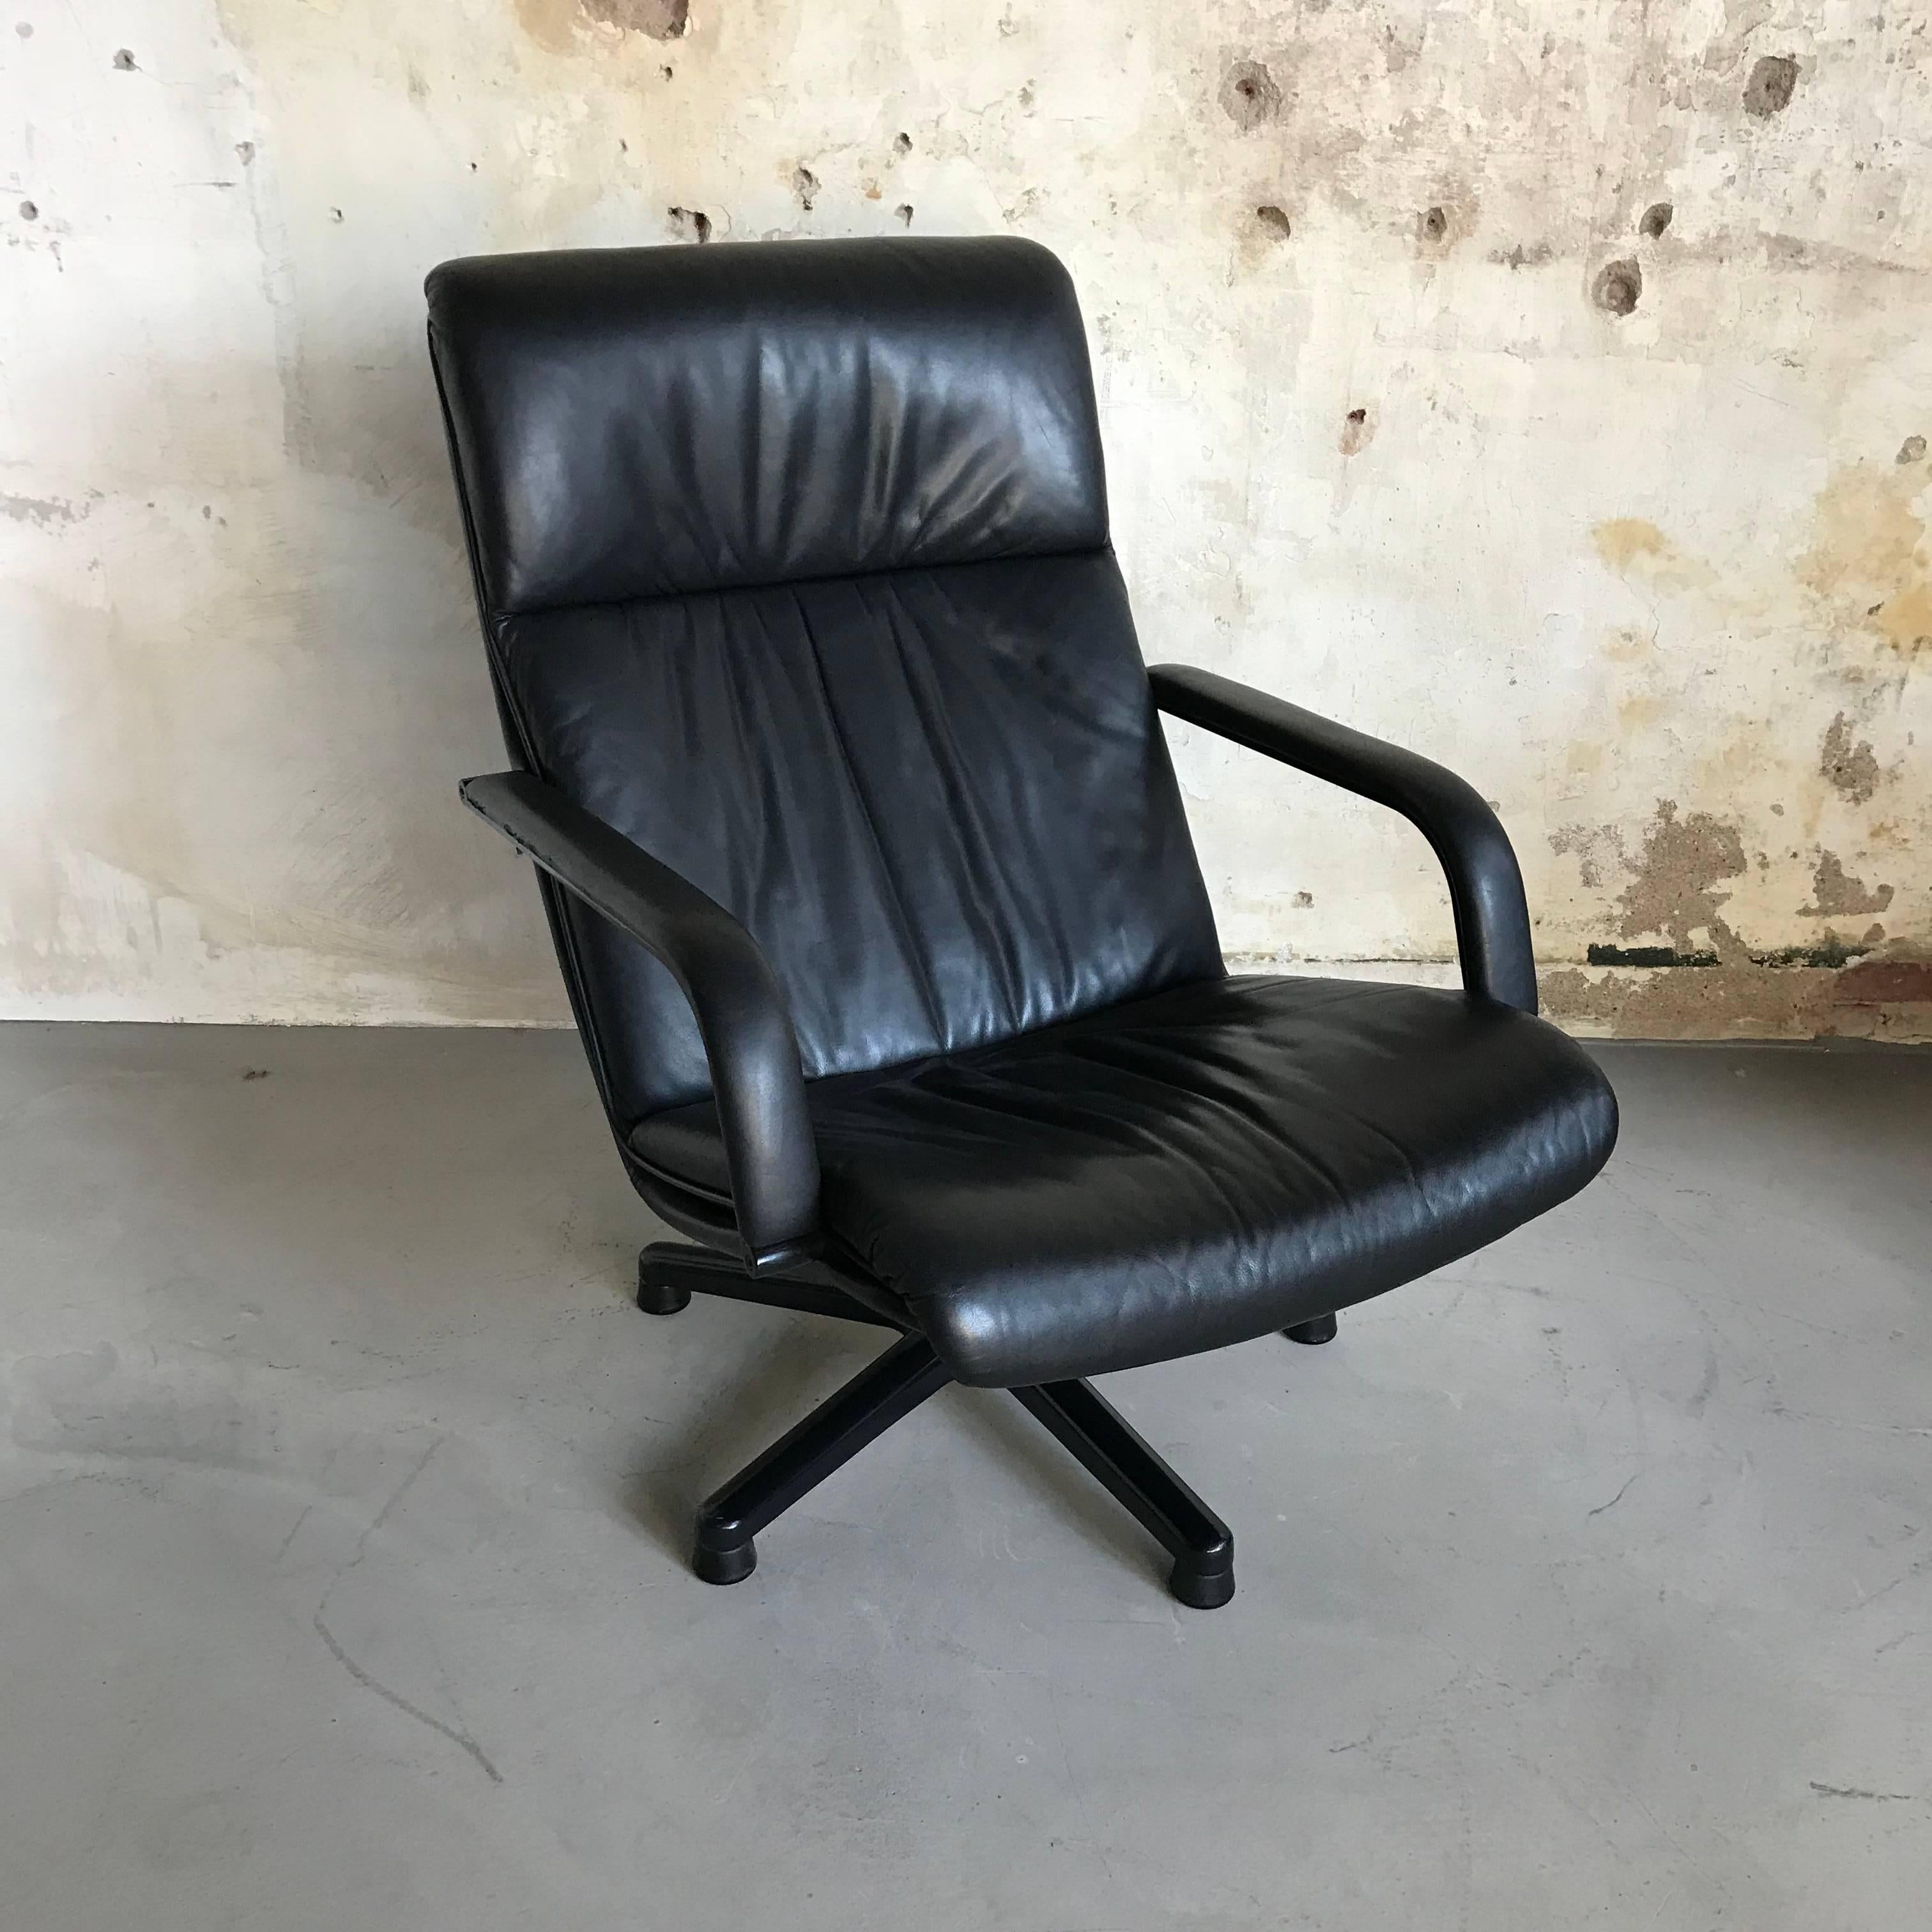 Artifort swivel lounge chair F194 Ambassador in black leather. Excellent, original condition with very little wear. Fantastic comfort!









 